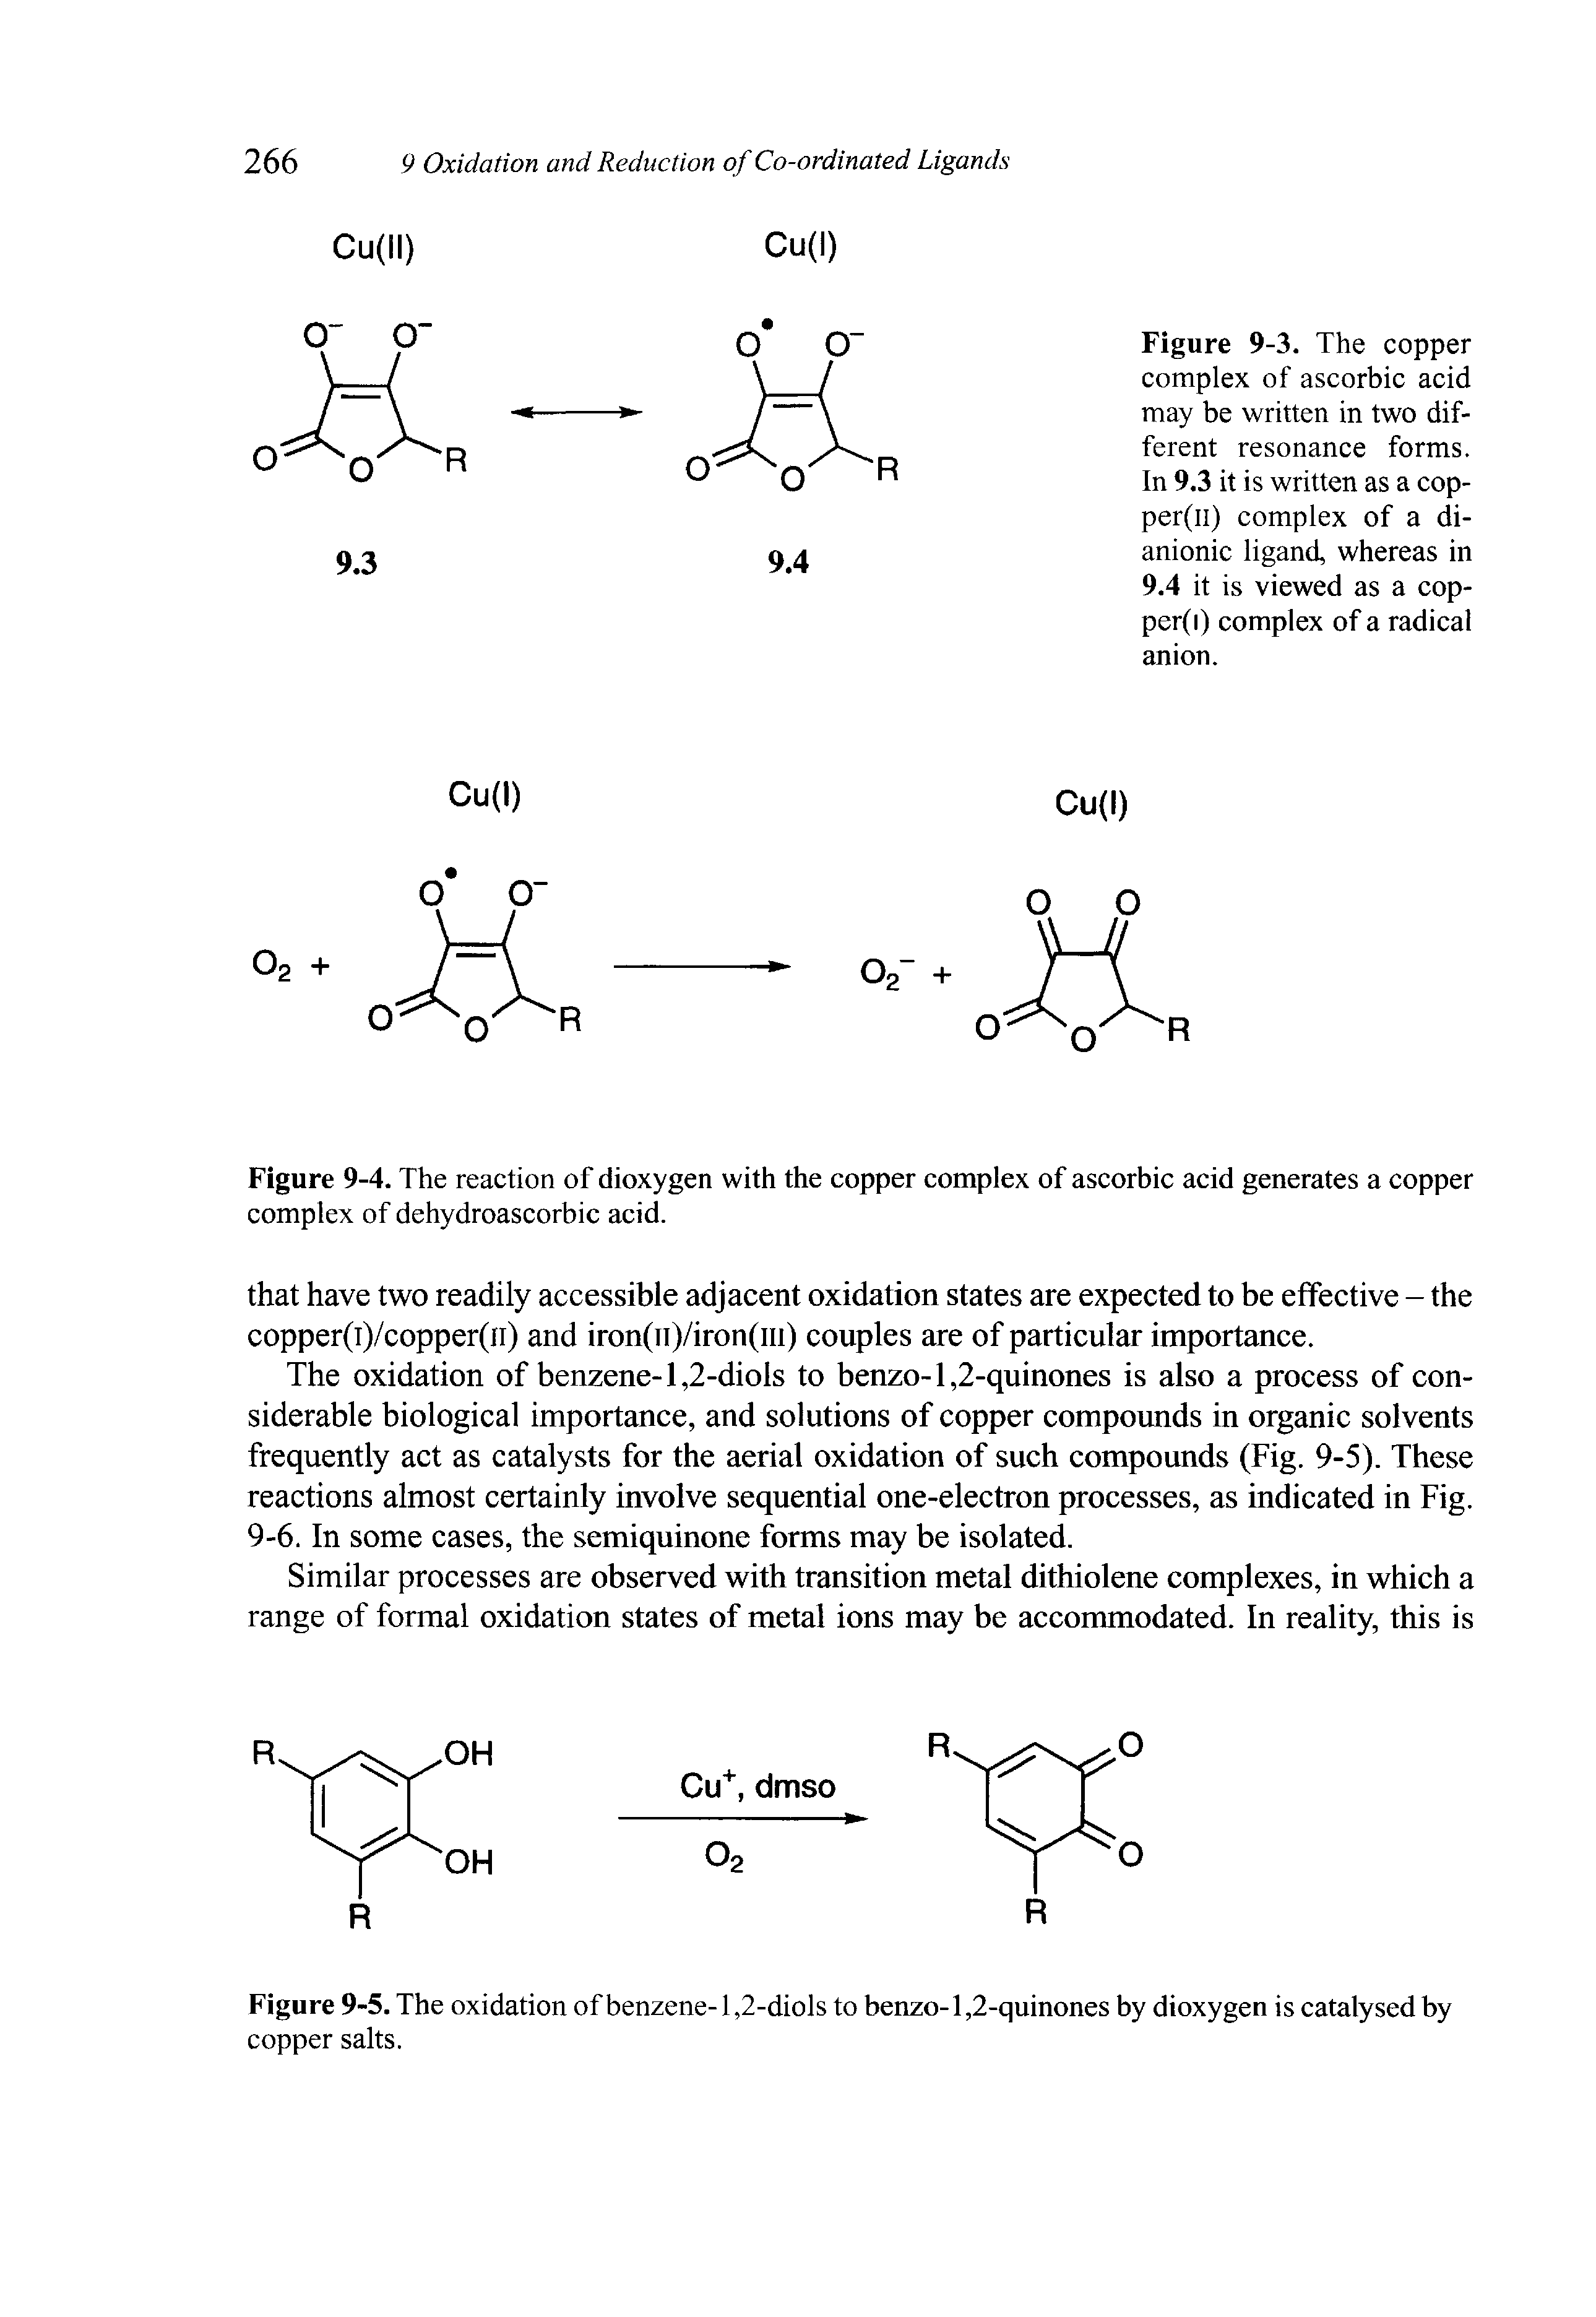 Figure 9-3. The copper complex of ascorbic acid may be written in two different resonance forms. In 9.3 it is written as a cop-per(n) complex of a dianionic ligand, whereas in 9.4 it is viewed as a cop-per(i) complex of a radical anion.